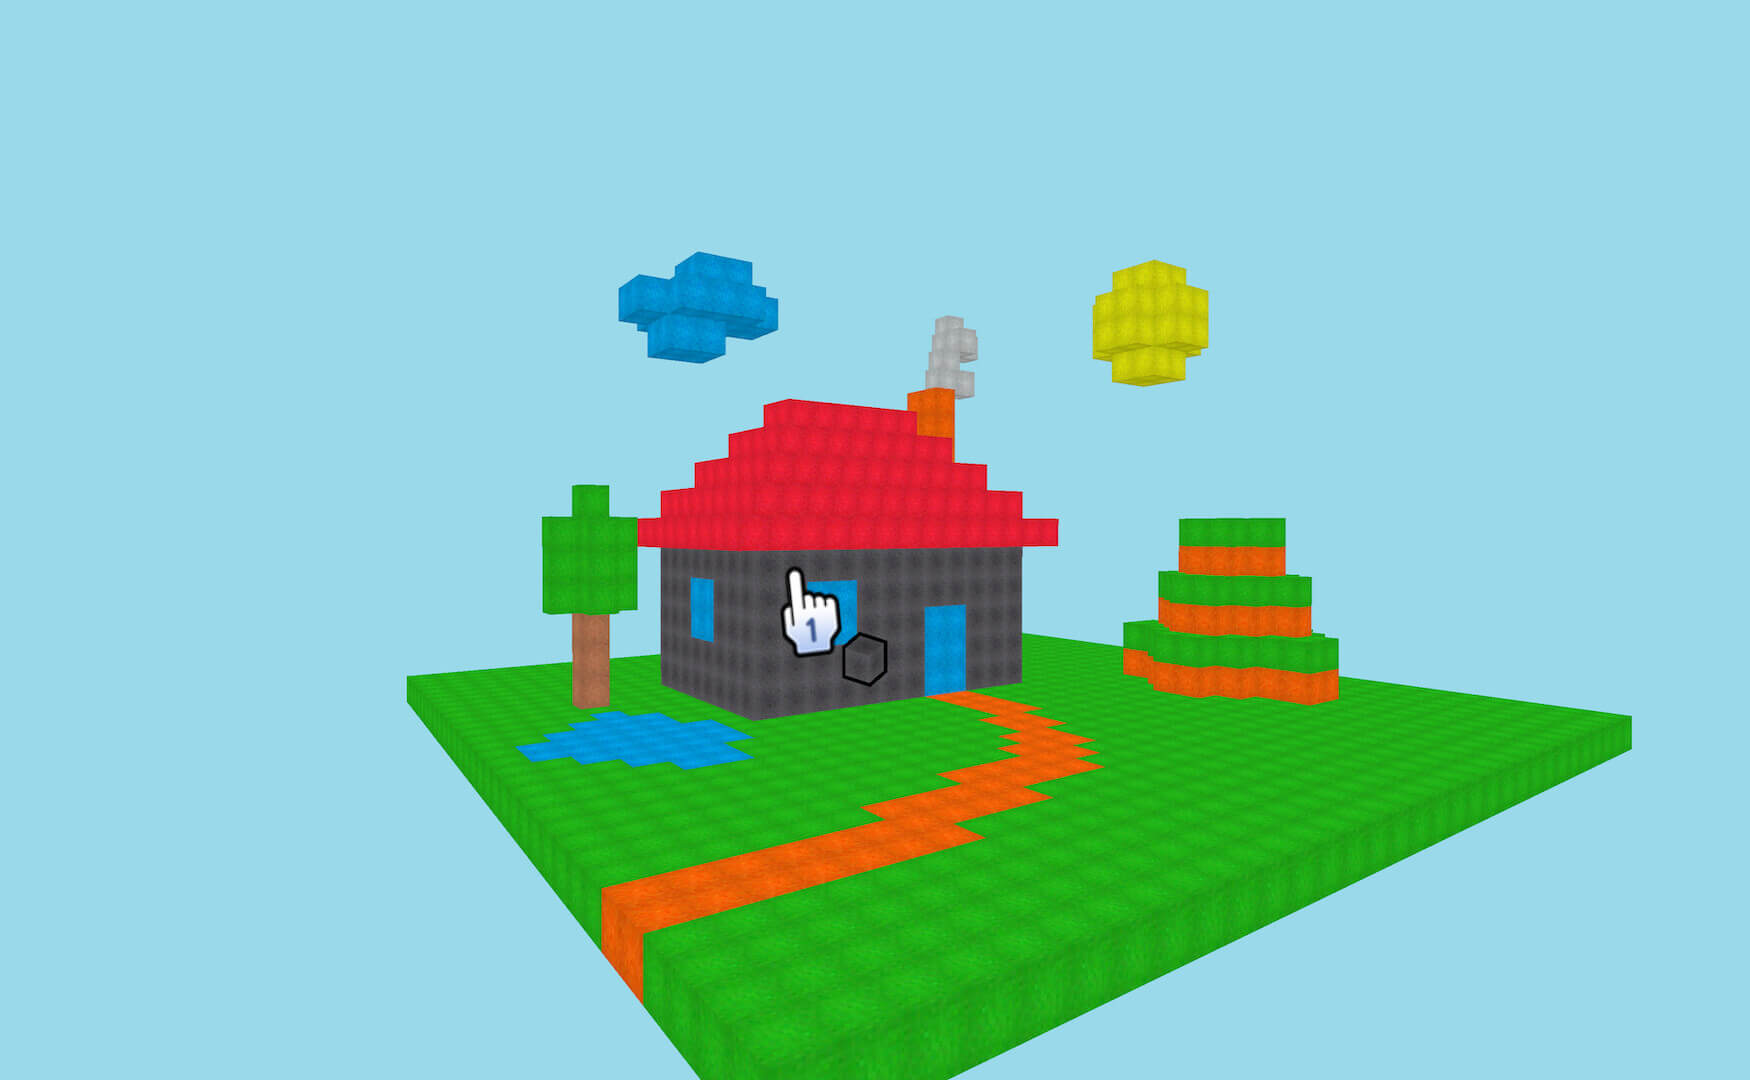 A random freeware game depicting a blocky house in the Dolphin emulator on Steam